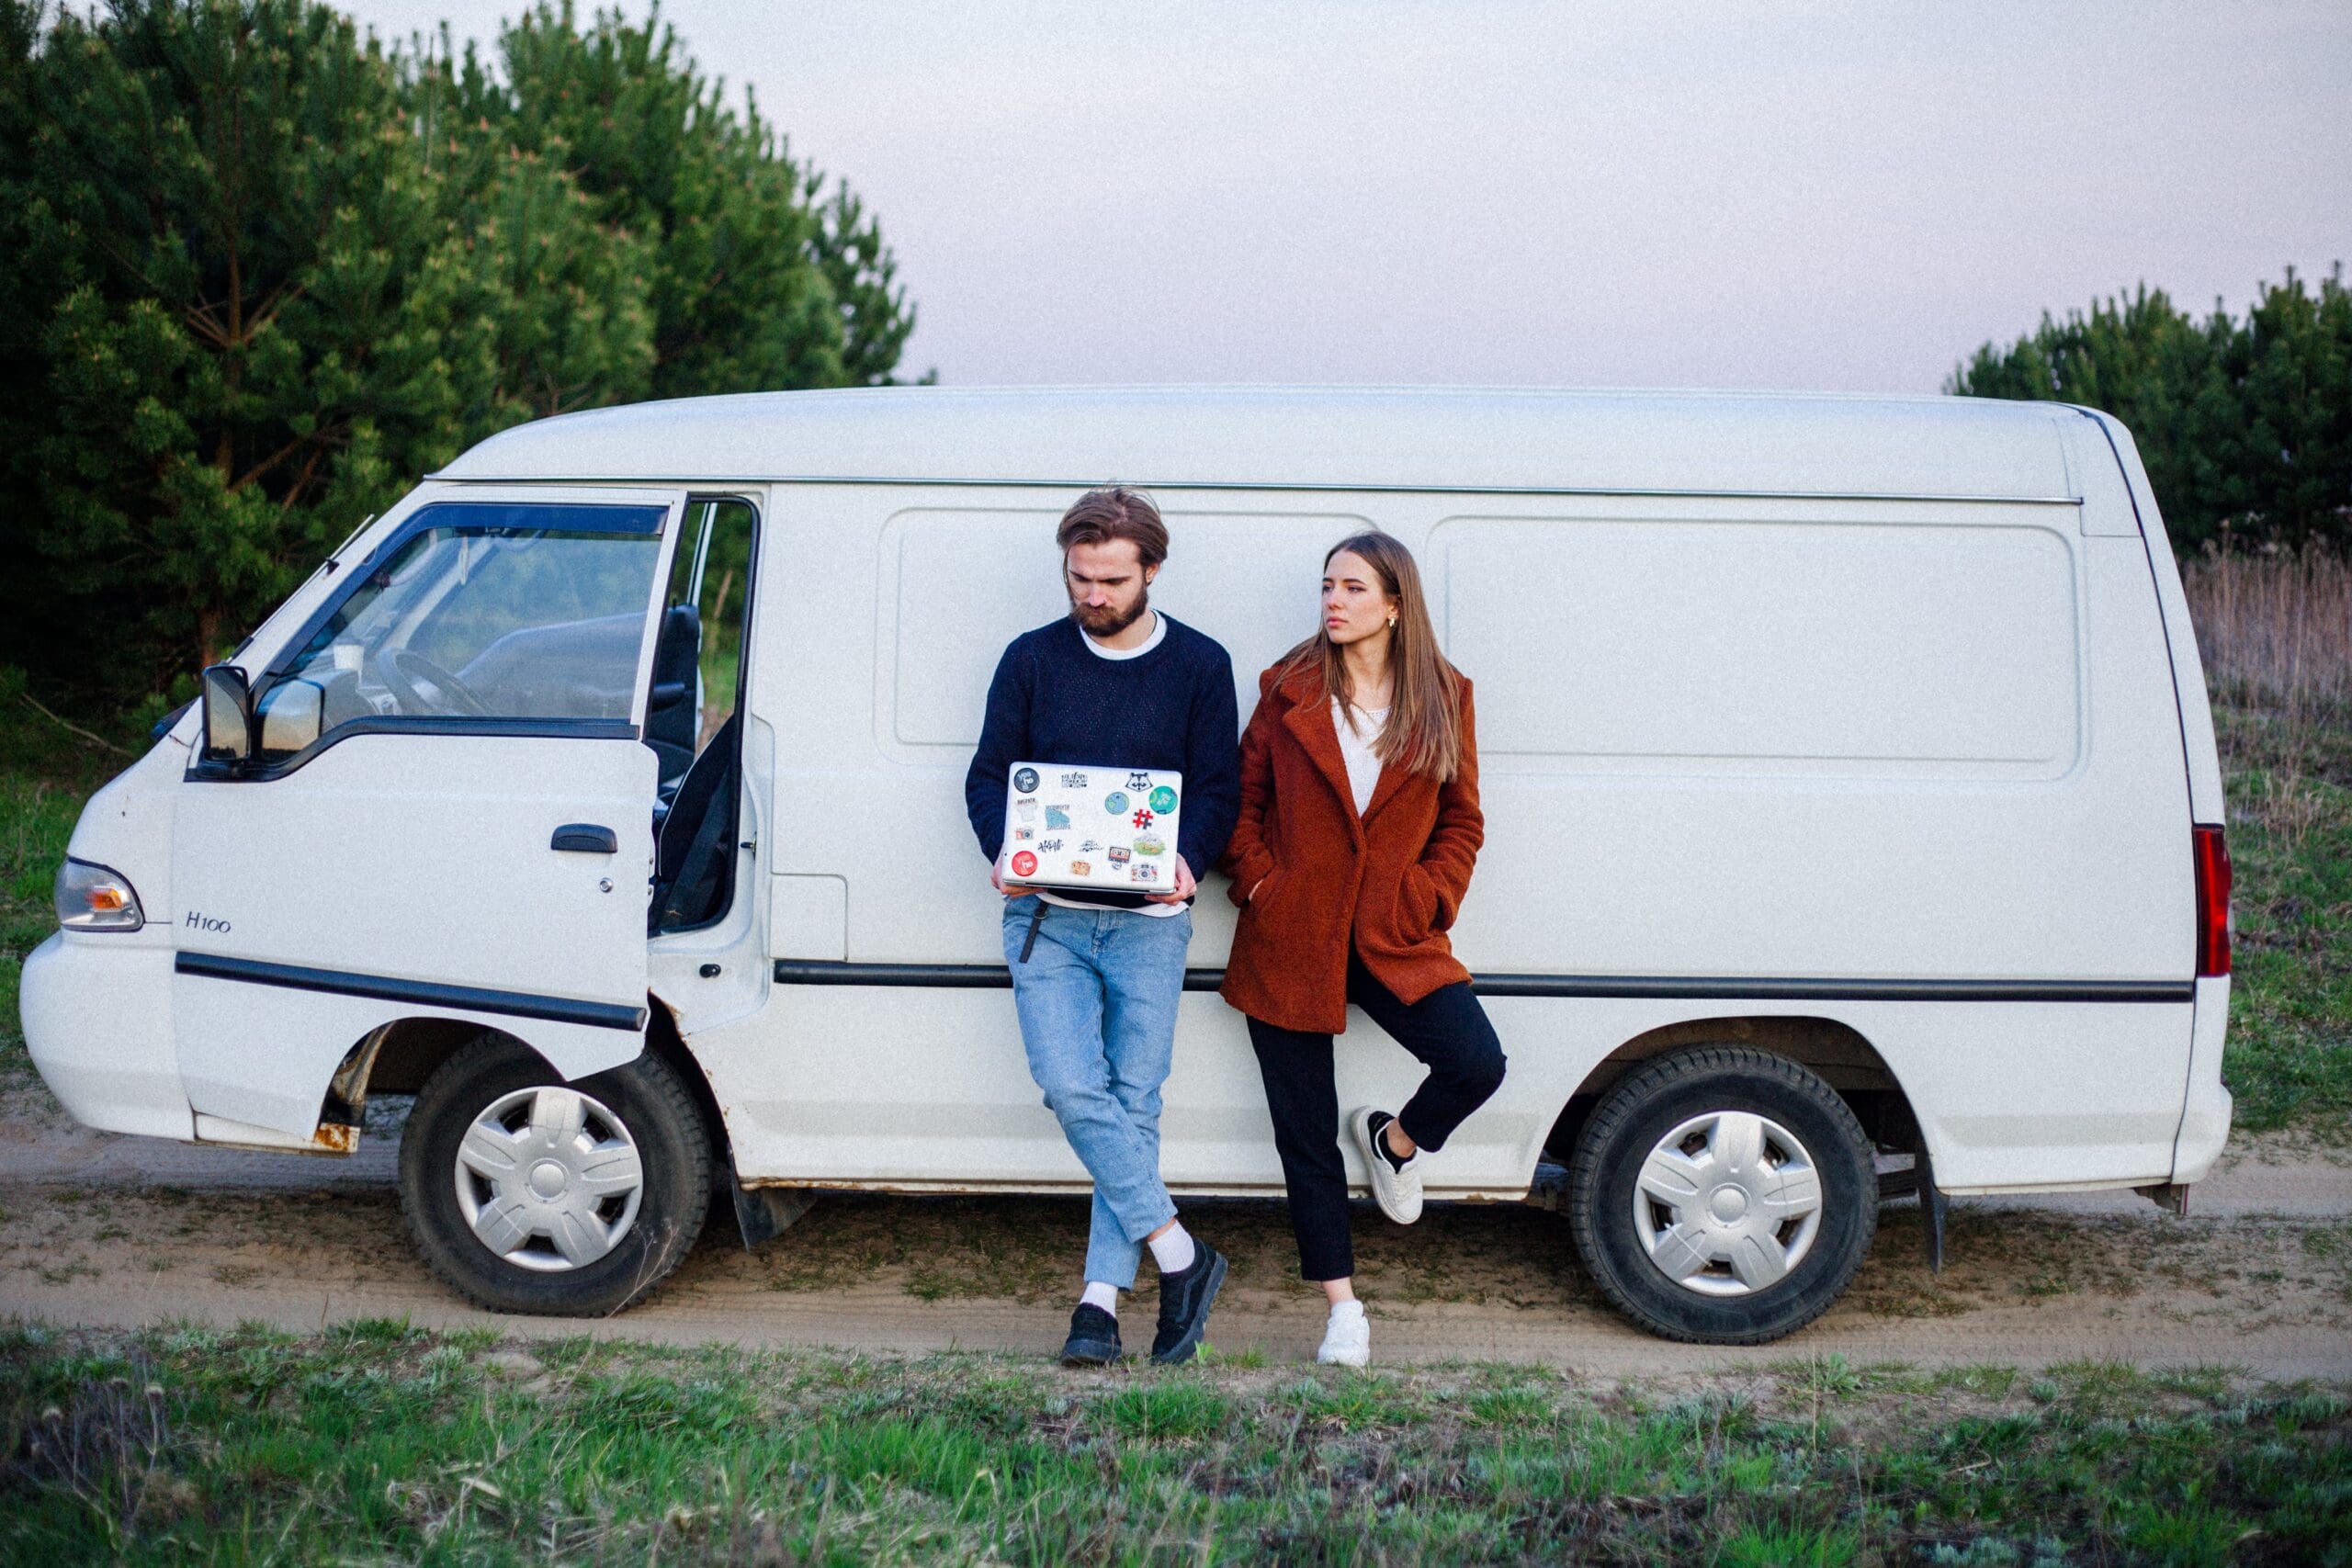 2 people stood in front of a white van